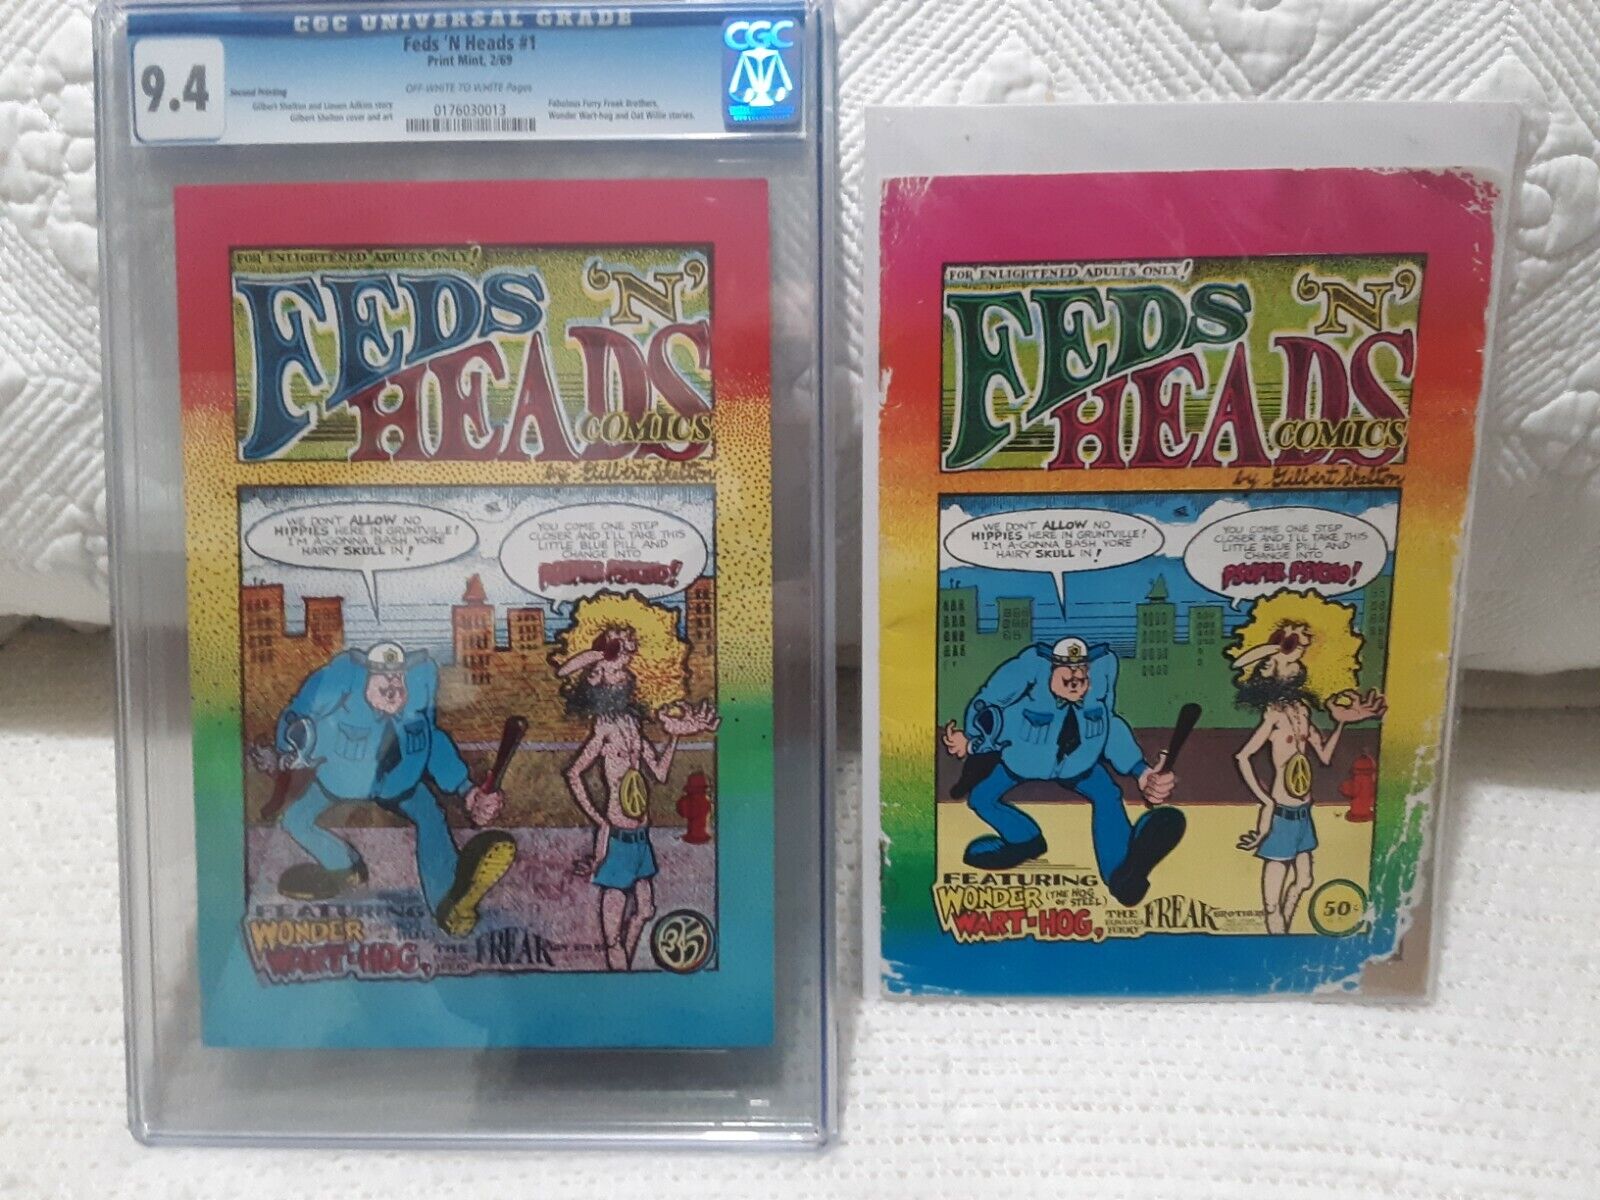 FEDS N HEADS #1 1ST FURRY FREAK BROTHERS CGC9.4 RARE2ND PRINT+Reader*SEE DETAILS